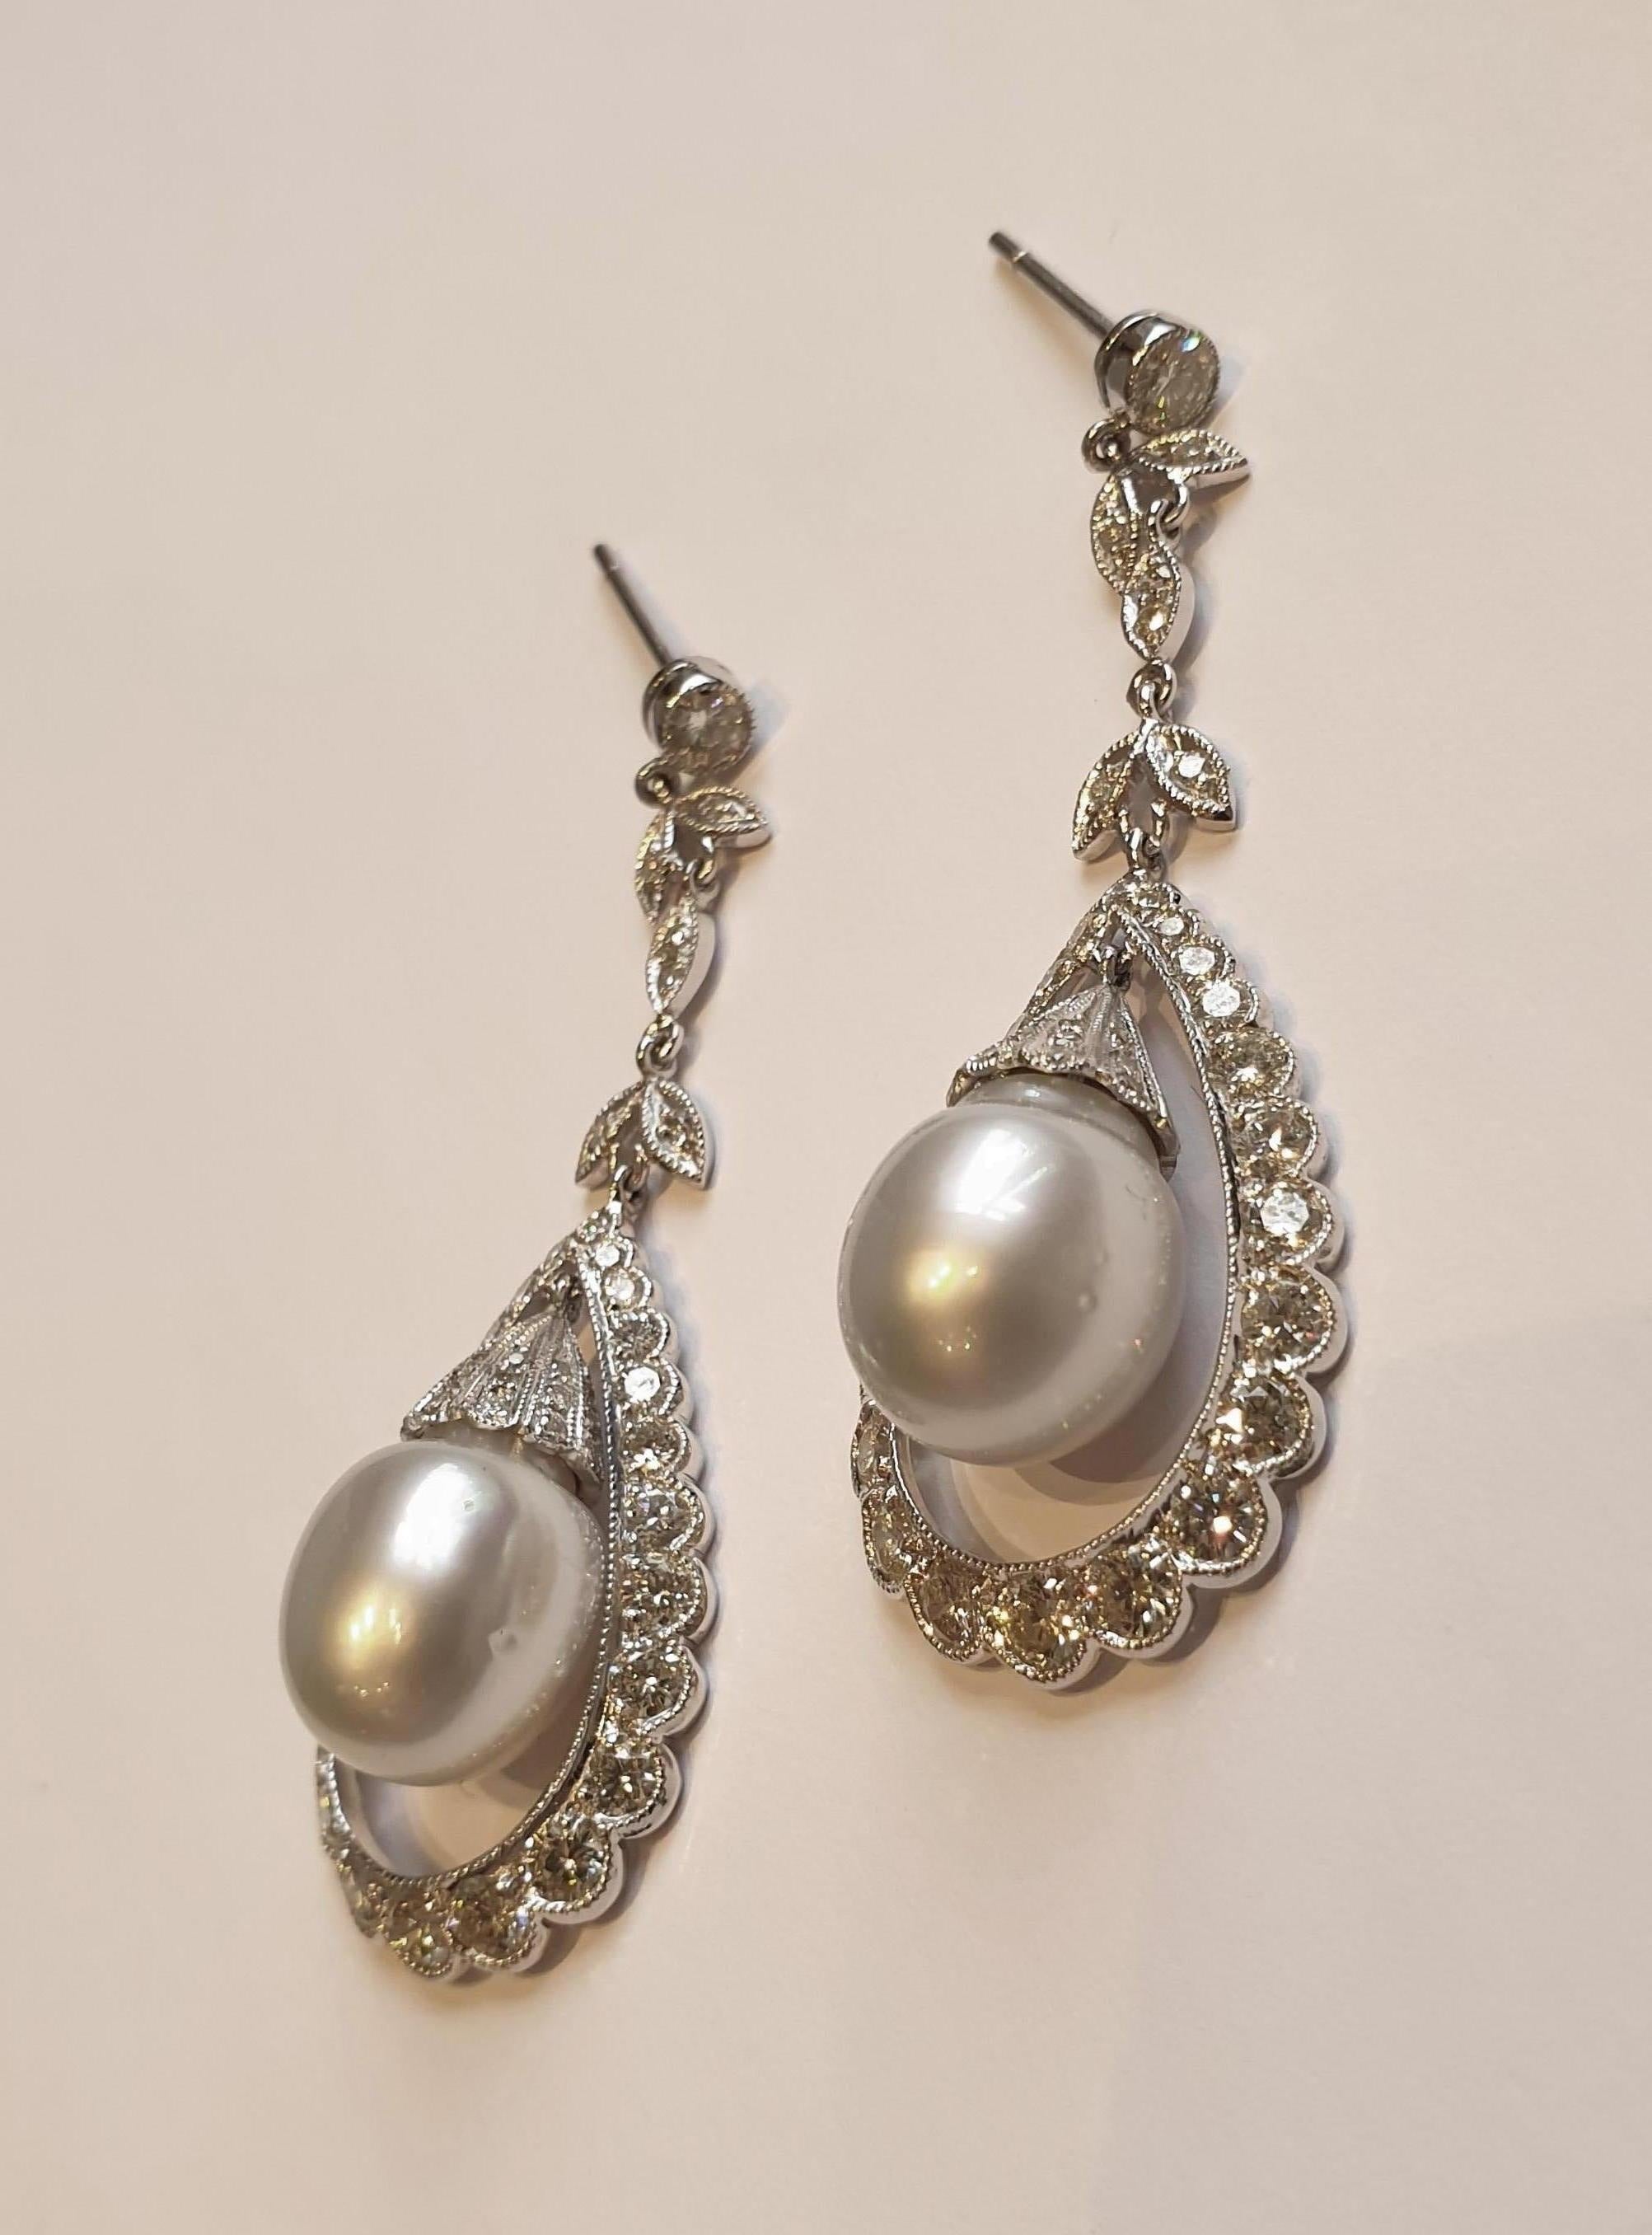 Art Deco style, Sweden about 1930. Set mounted in 18 carat white gold. Each earring with a white South Sea pearl measuring 4.49 in ( 11,4 mm ) in diameter. Bordered by 92 brilliant-cut diamonds with a total weight of ca. 4,02 ct. Millegrain setting.